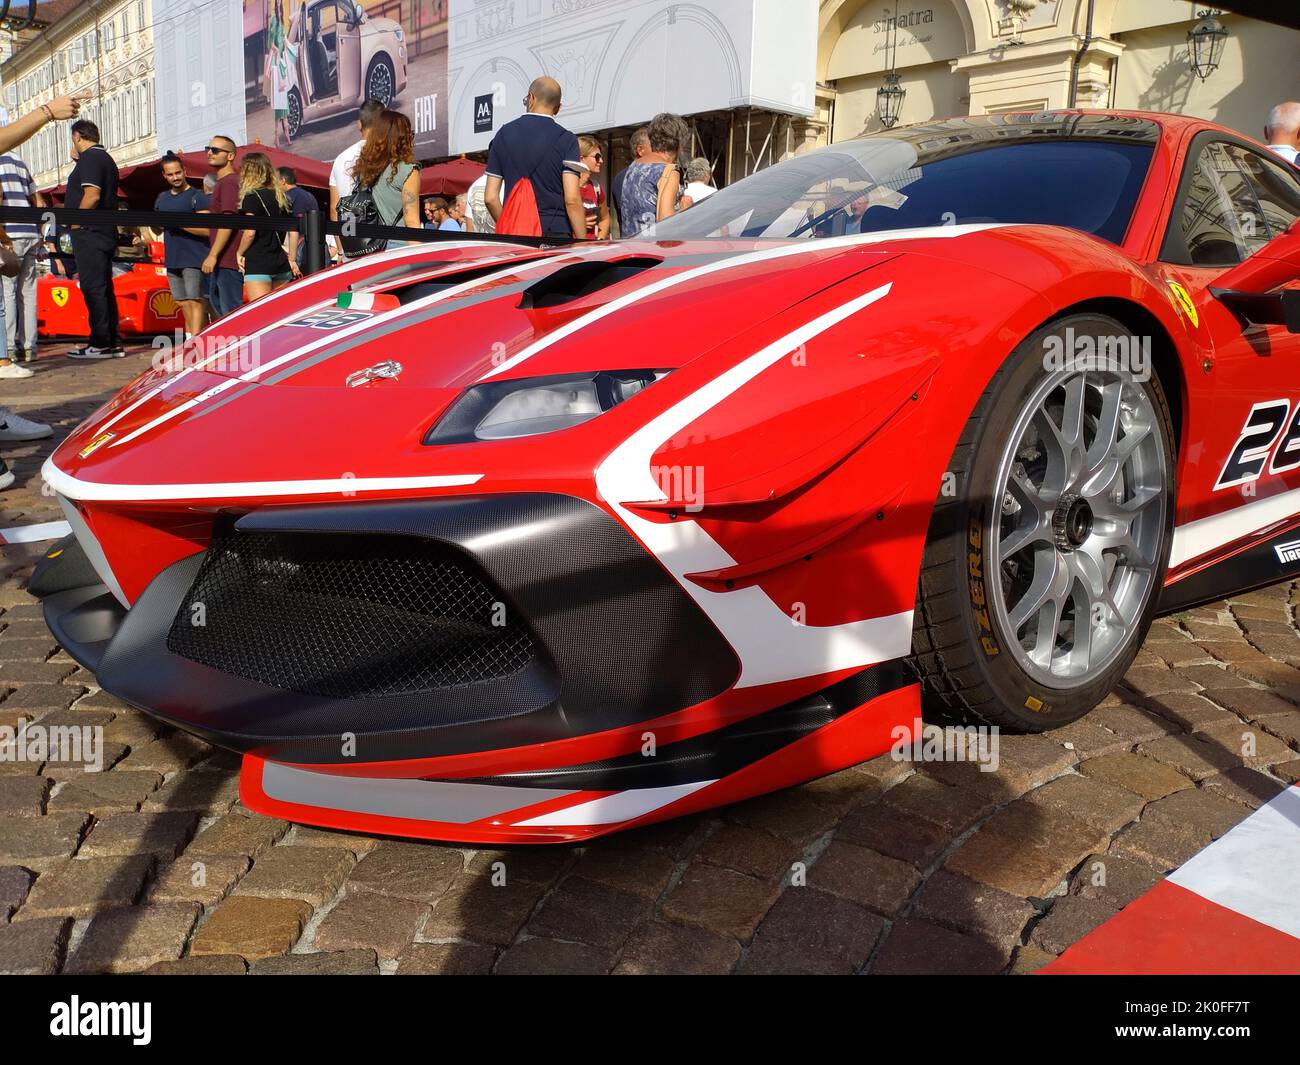 Italie Piémont Turin 'Autolook week Torino' -FERRARI 488 CHALLENGE EVO crédit: Realy Easy Star/Alay Live News Banque D'Images